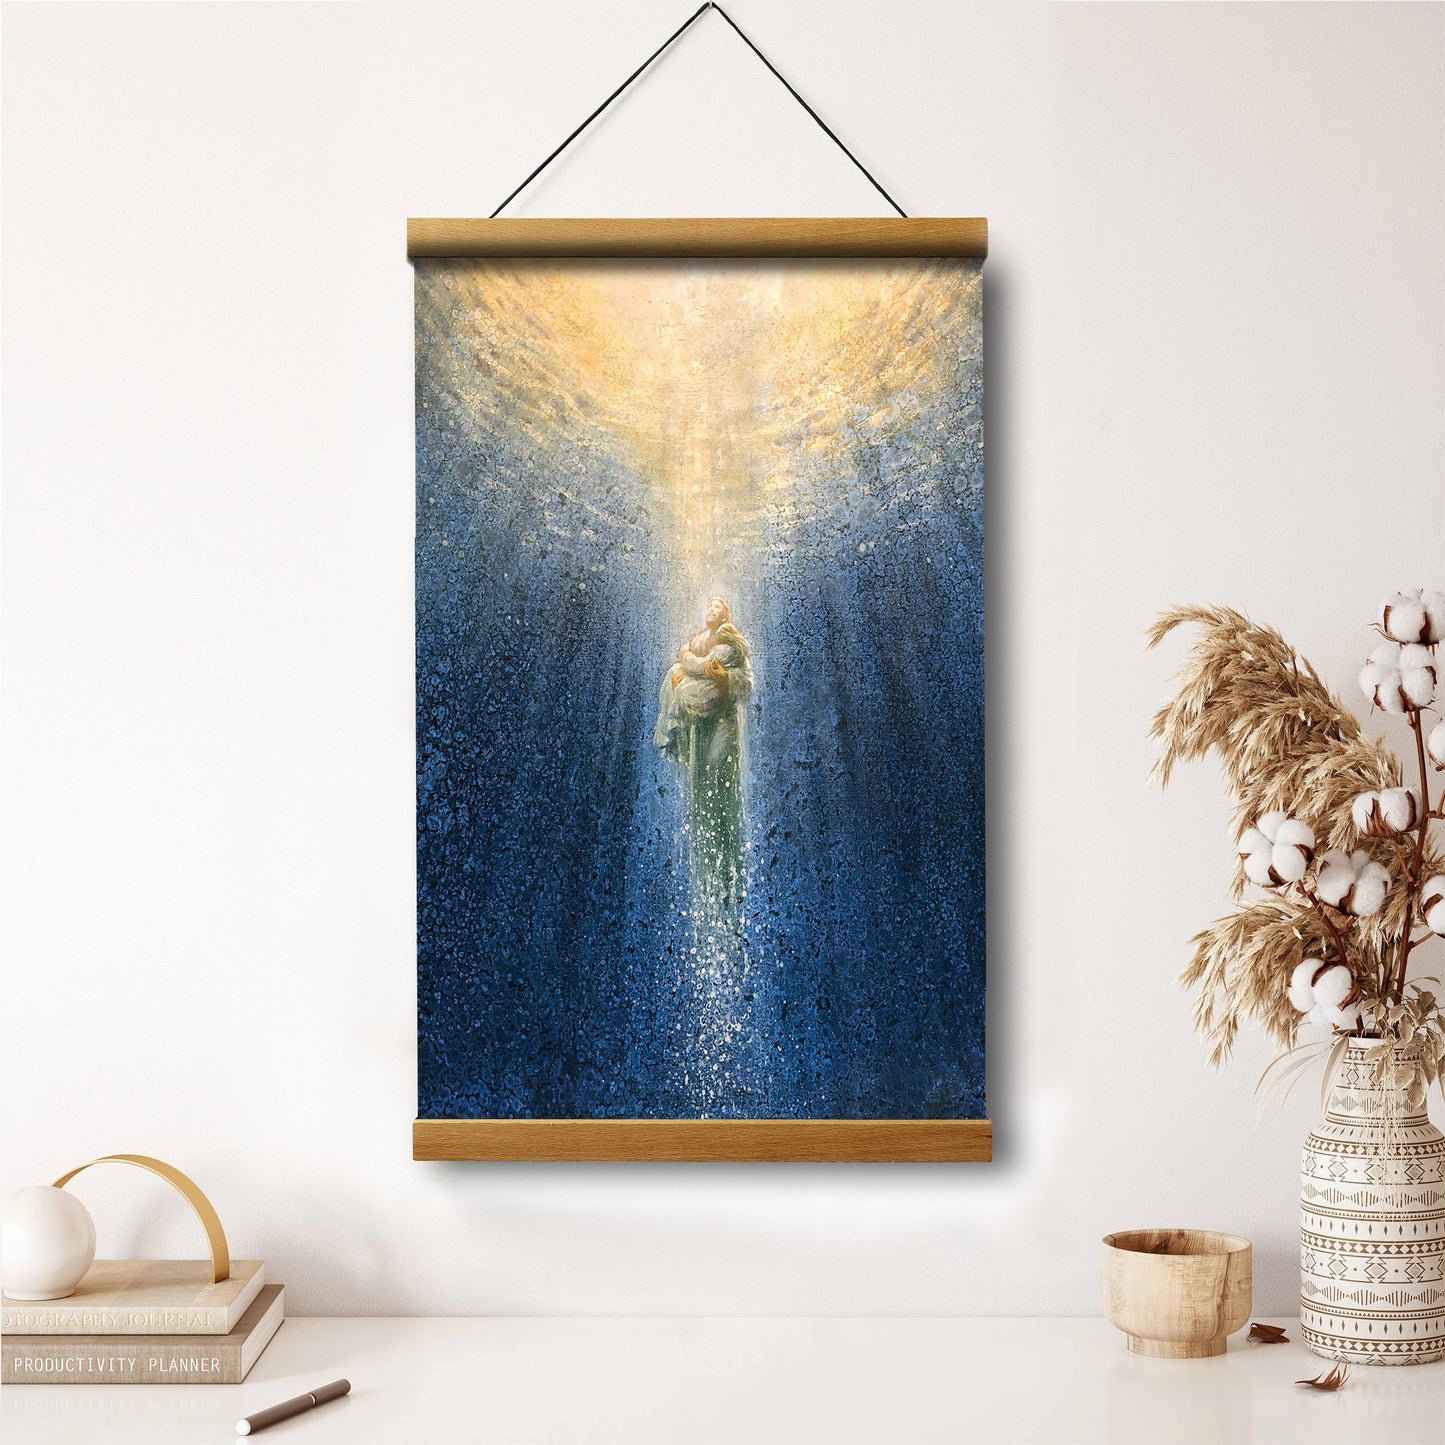 Rescue Me Hanging Canvas Wall Art - Christan Wall Decor - Religious Canvas